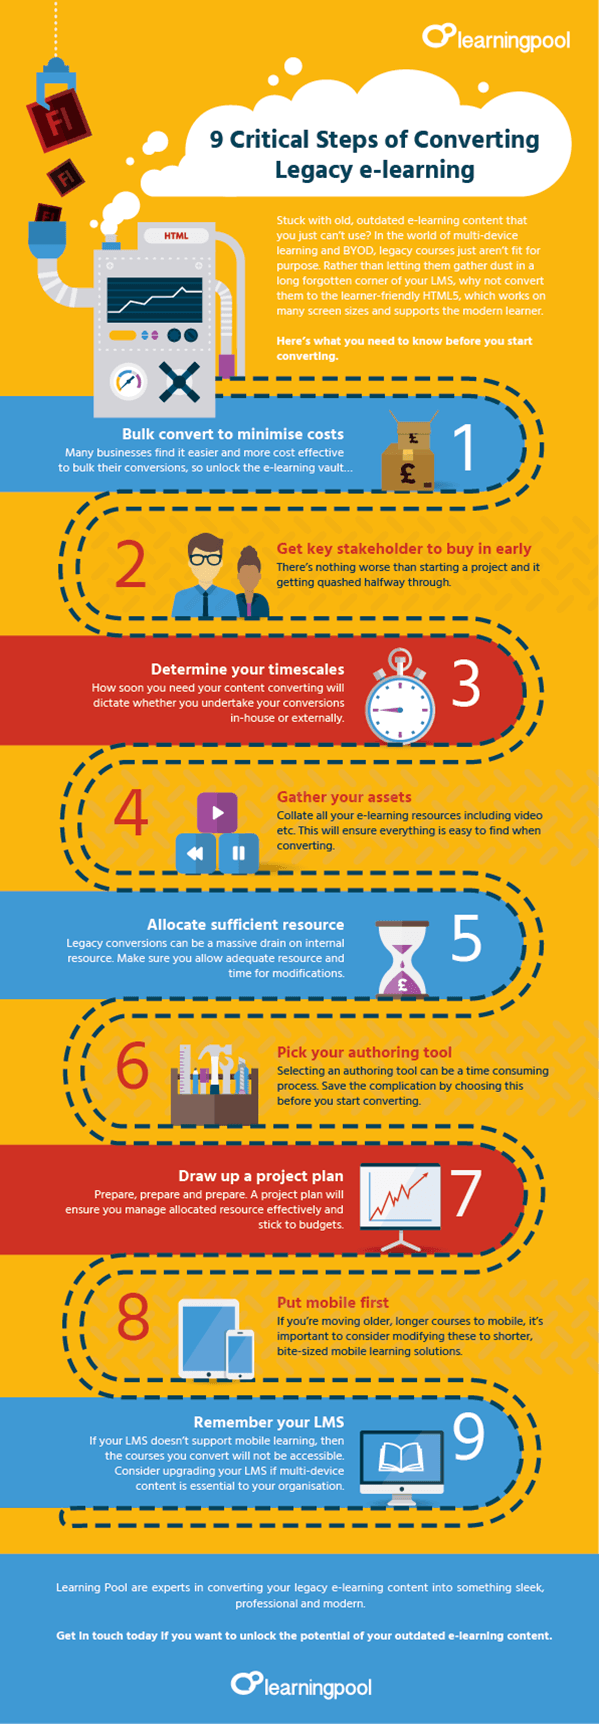 9 Critical Steps of Converting Legacy eLearning Infographic